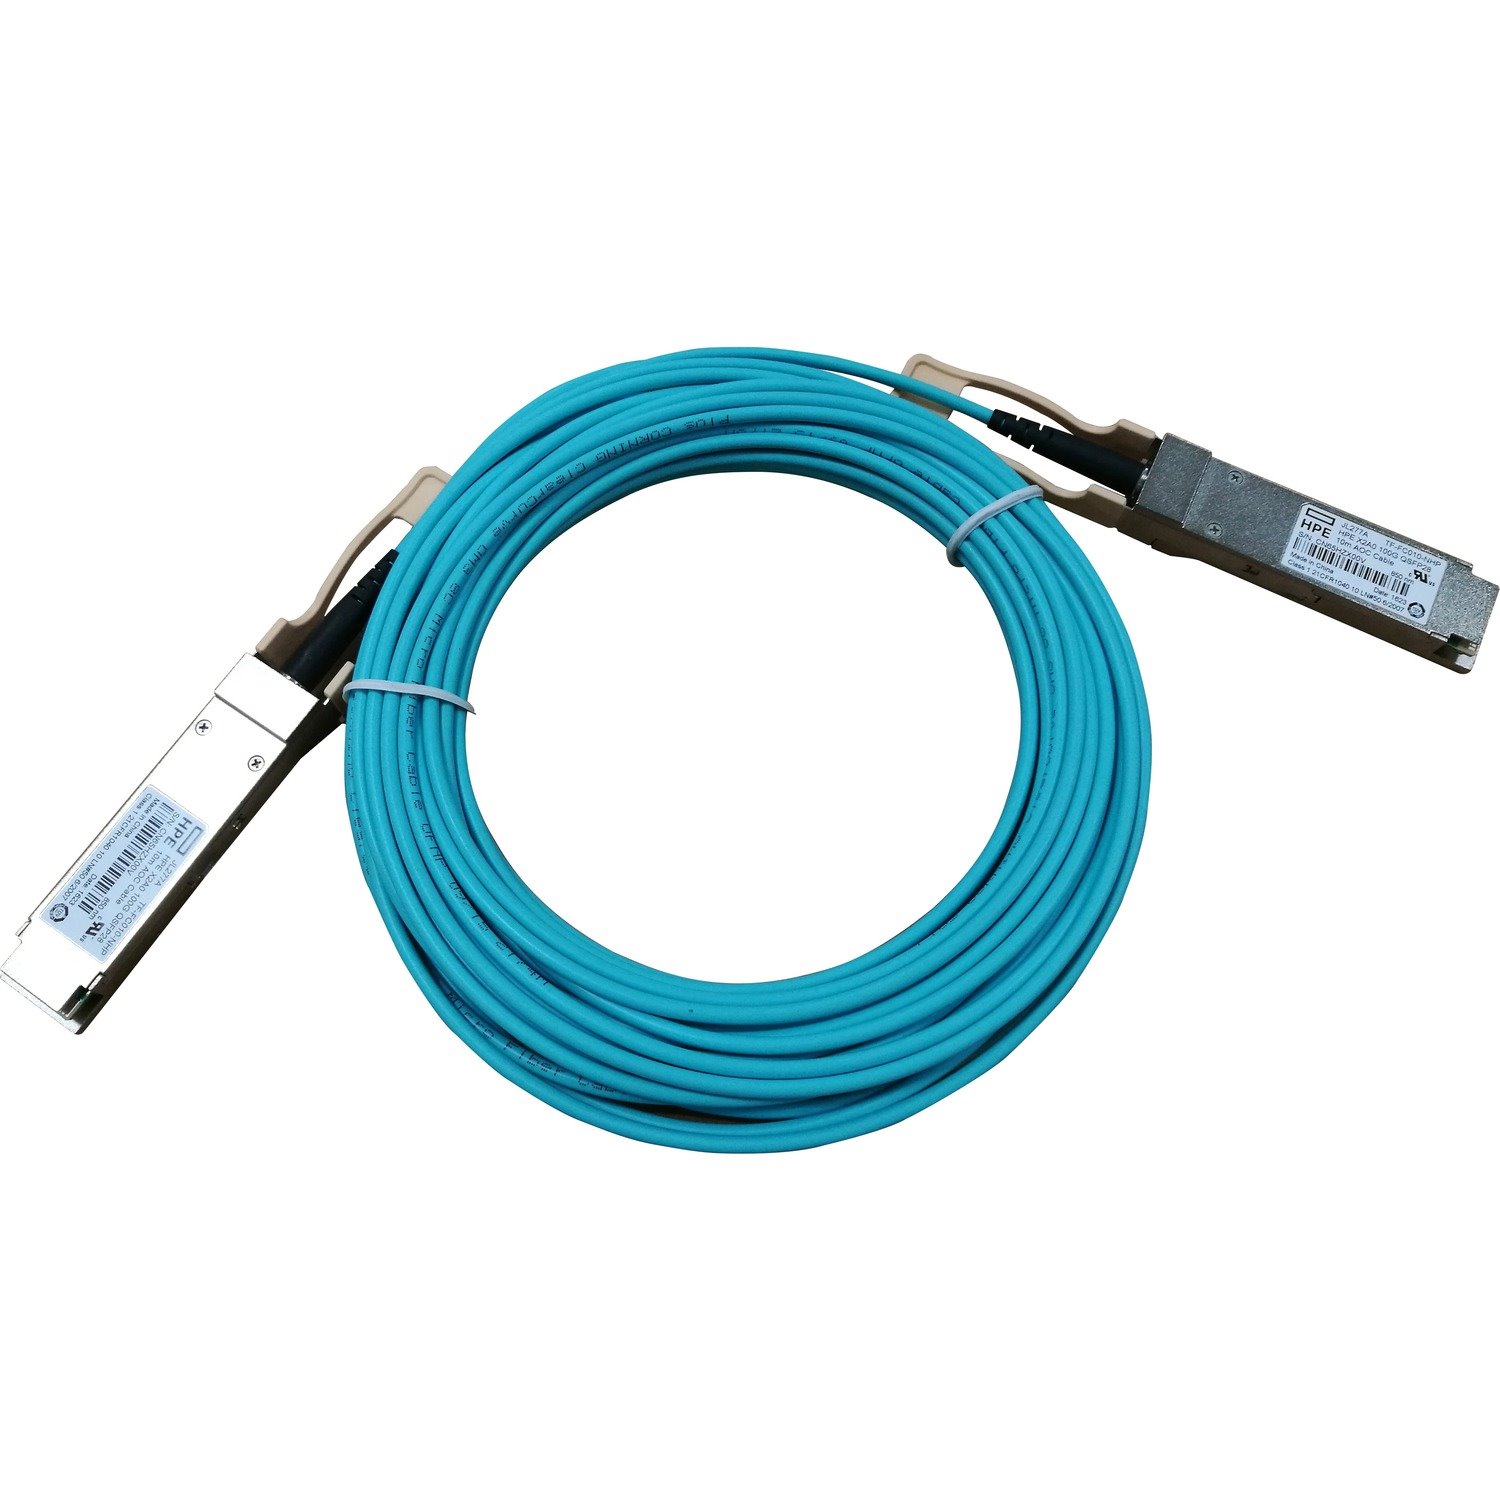 HPE X2A0 100G QSFP28 to QSFP28 10-m Active Optical Cable